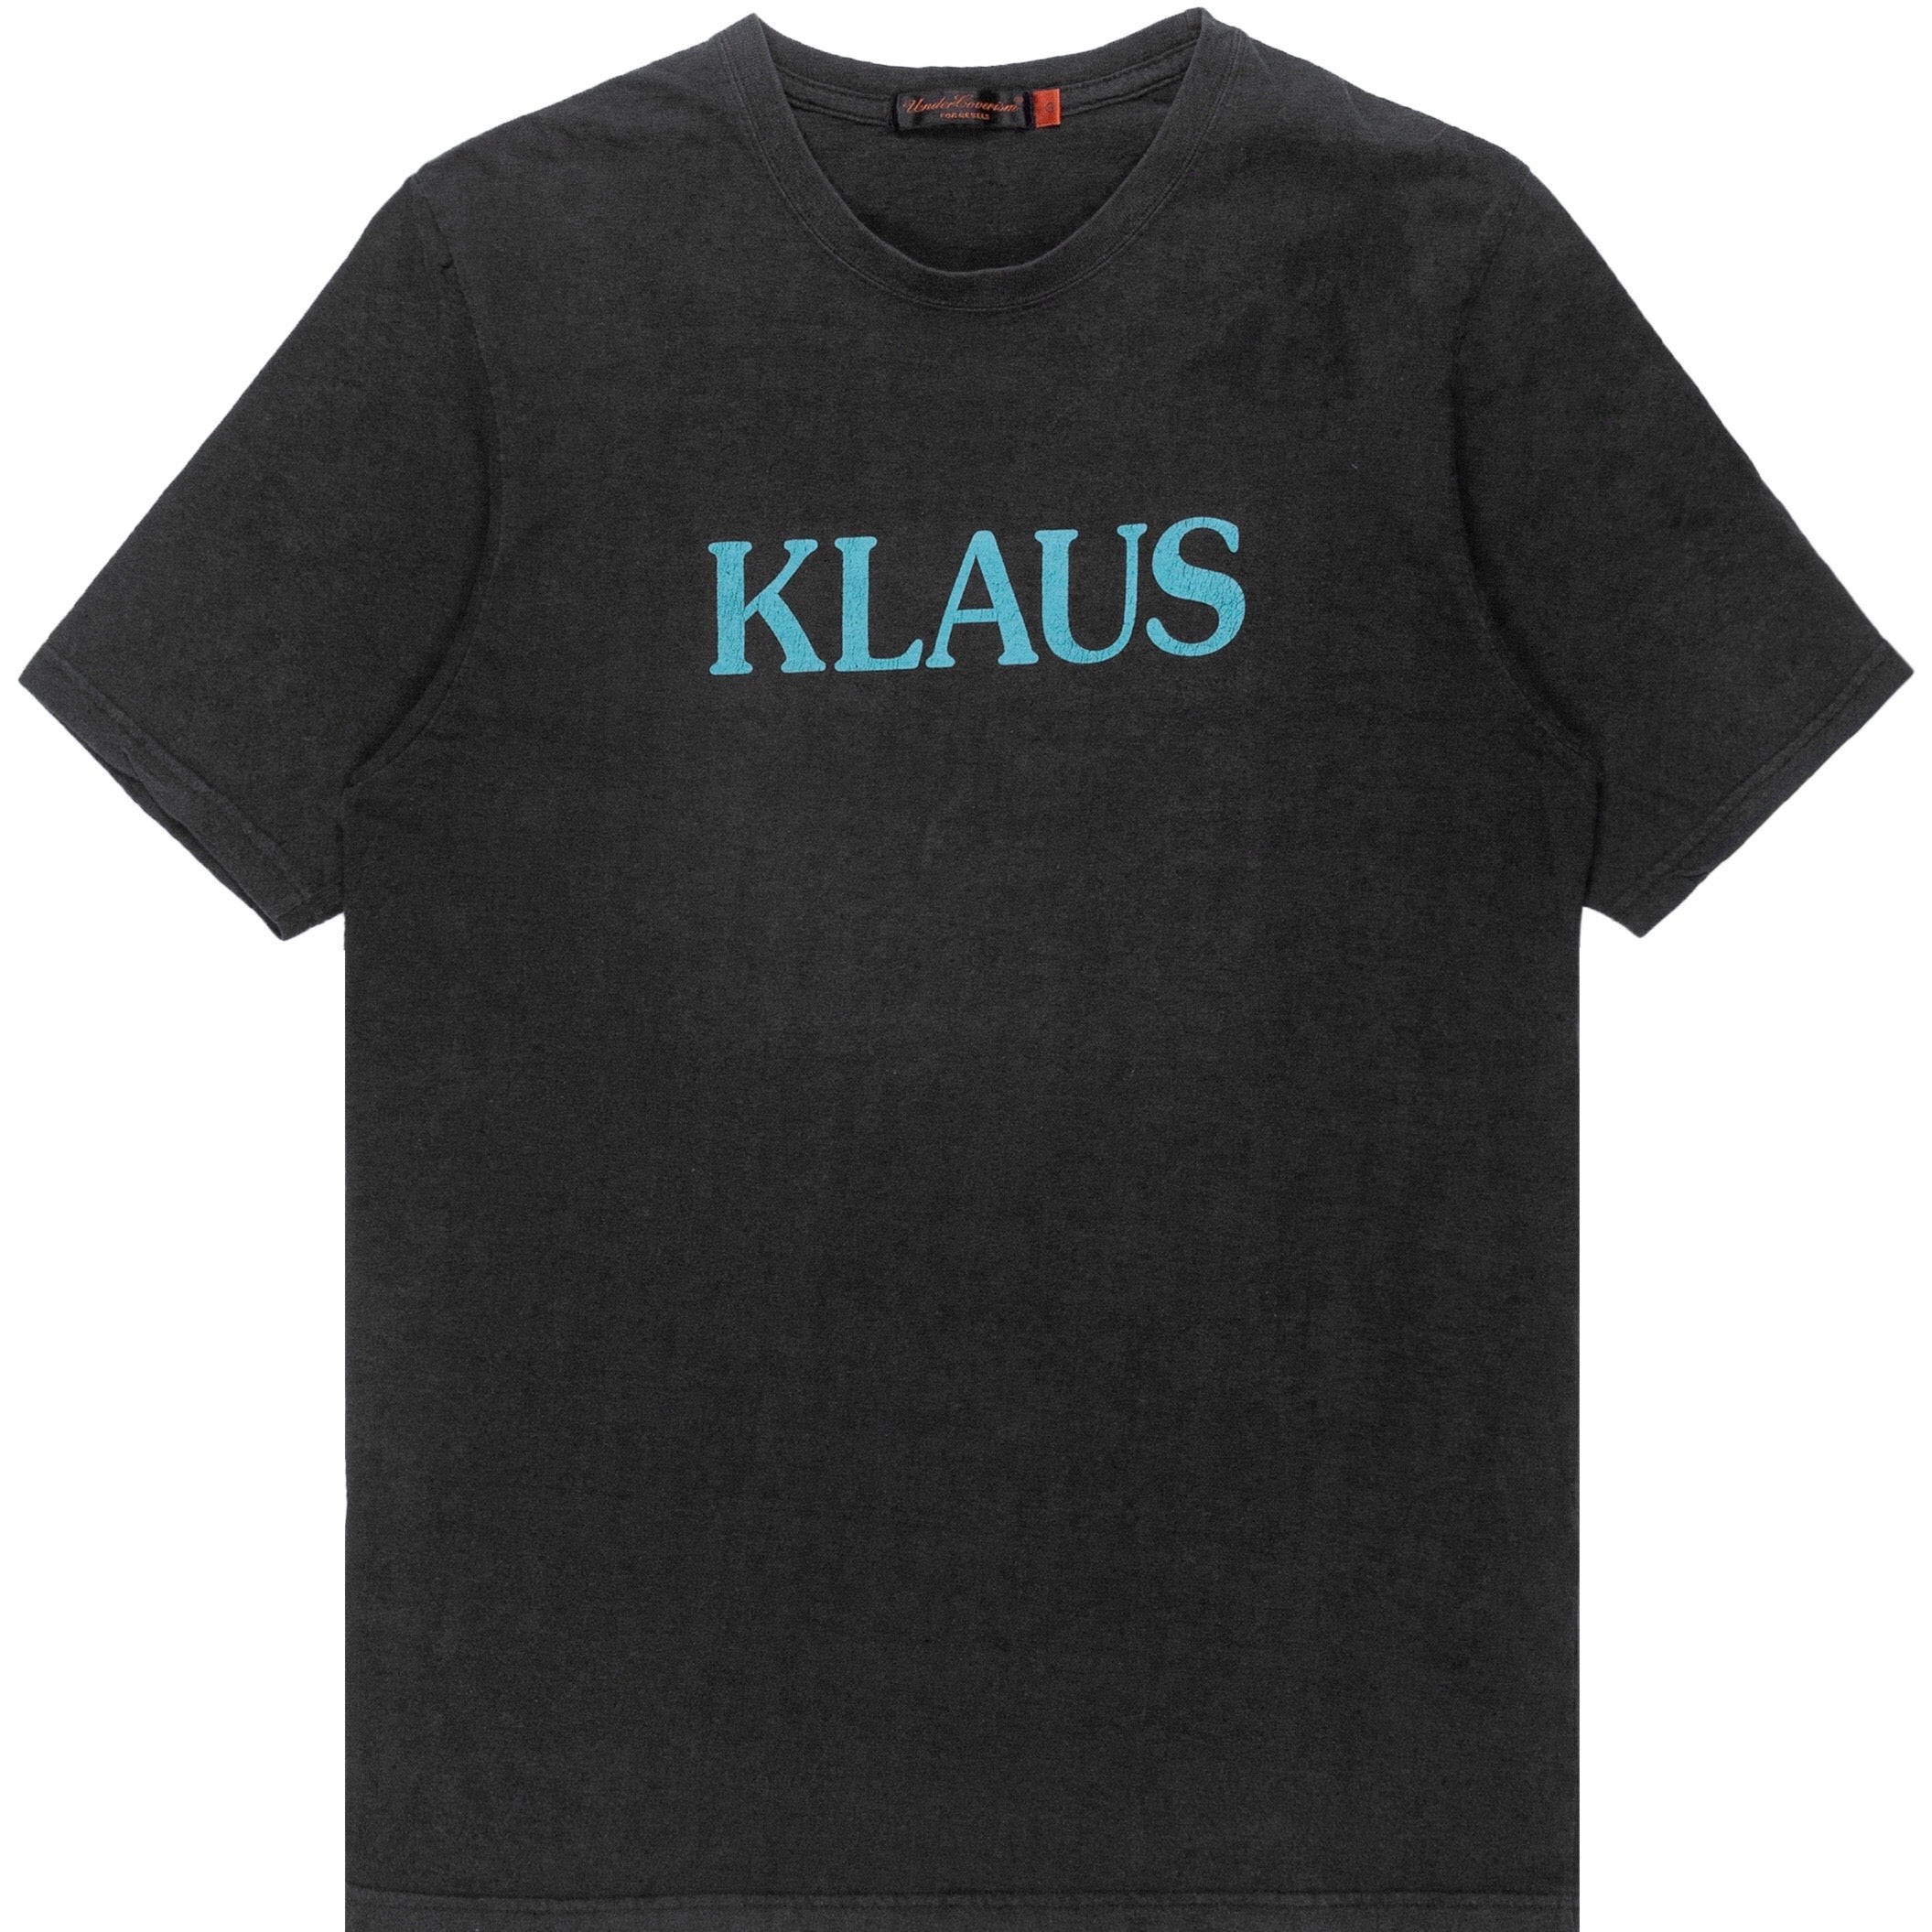 Undercover “Klaus” Tee - SS06 “T”